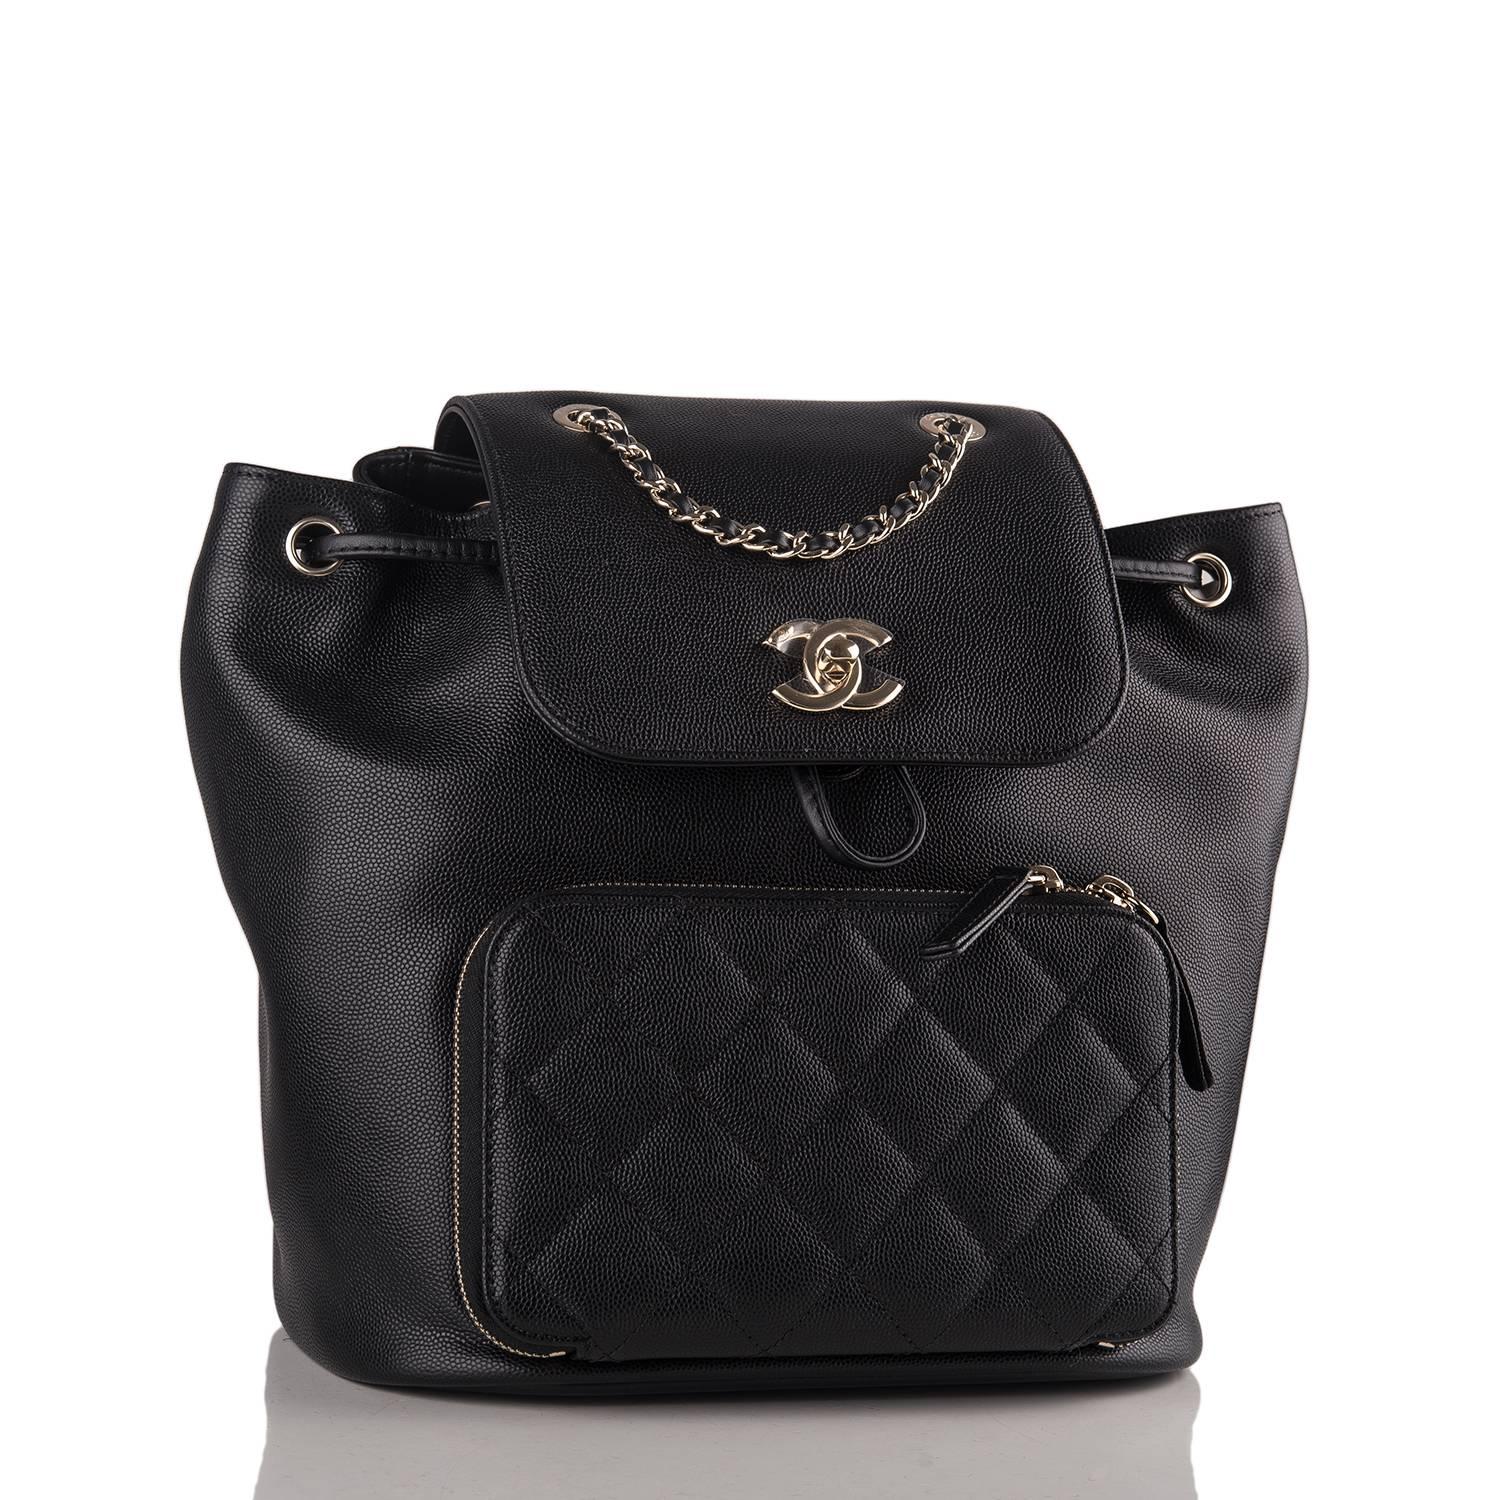 Chanel Business Affinity backpack of black caviar leather with gold tone hardware.

This bag features a front flap with CC turnlock closure, drawstring closure, quilted zip around pocket at front with two leather pulls, quilted halfmoon pocket at